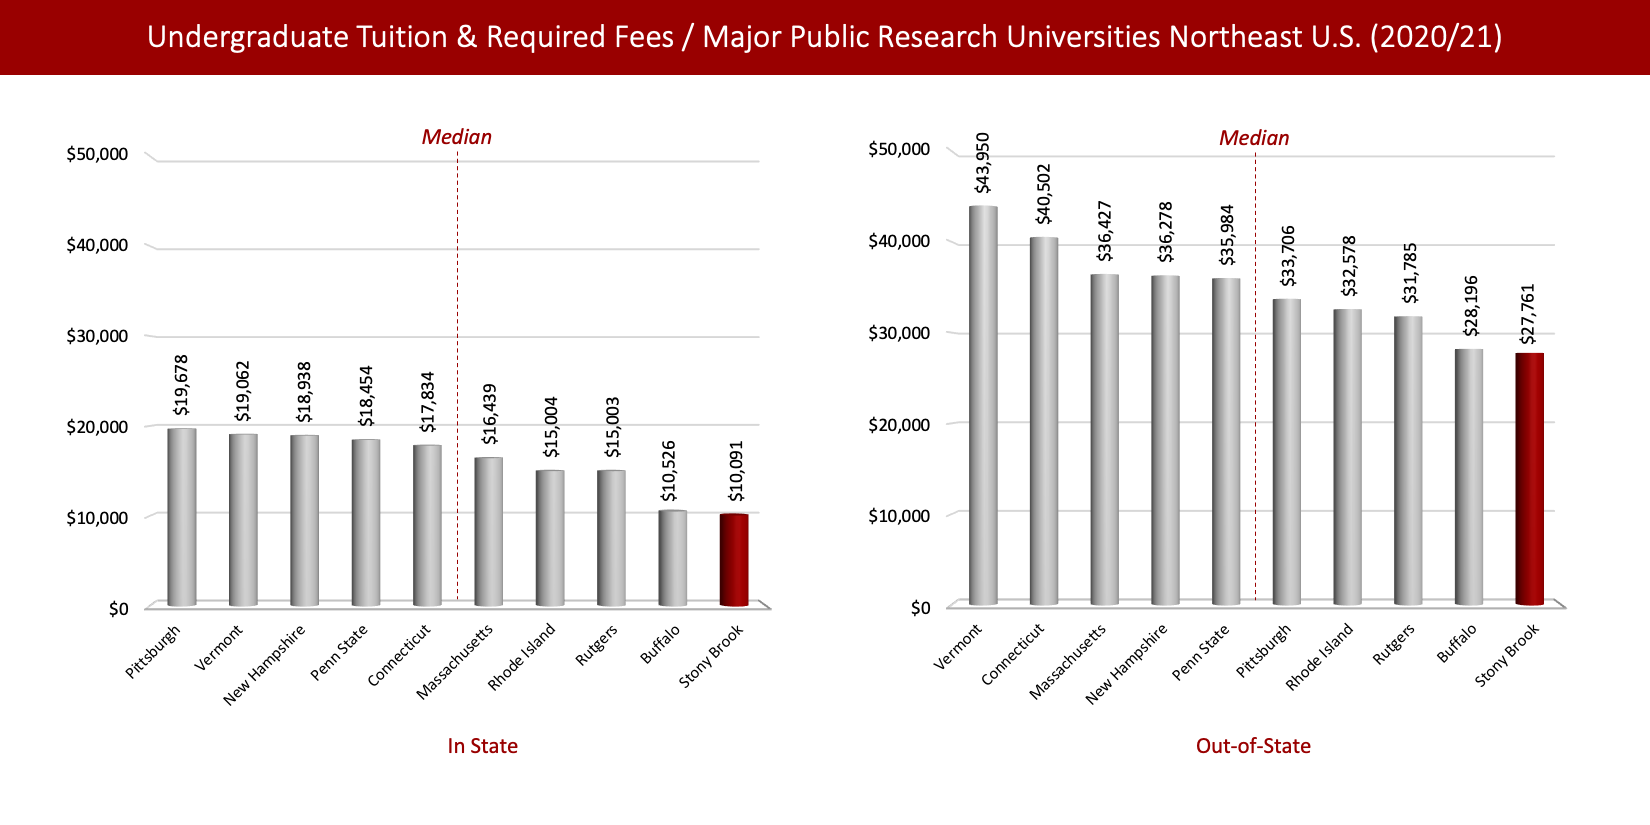 Left chart shows 2019/20 In-State Undergraduate Tuition & Required Fees / Major Public Research Universities Northeast U.S..  Pittsburgh: $19,718 New Hampshire: $18,879 Vermont: $18,802 Penn State: $18,450 Connecticut: $17,226 Massachusetts: $16,389 Rutgers: $15,407 Rhode Island: $14,566 Buffalo: $10,524 Stony Brook: $10,175. Right chart shows 2019/20 Out-of-State Undergraduate Tuition & Required Fees / Major Public Research Universities Northeast U.S..   Vermont: $43,690 Connecticut: $39,894 Massachusetts: $35,710 Penn State: $35,514 New Hampshire: $35,409 Pittsburgh: $33,746 Rutgers: $32,189 Rhode Island: $31,686 Buffalo: $28,194 Stony Brook: $27,845